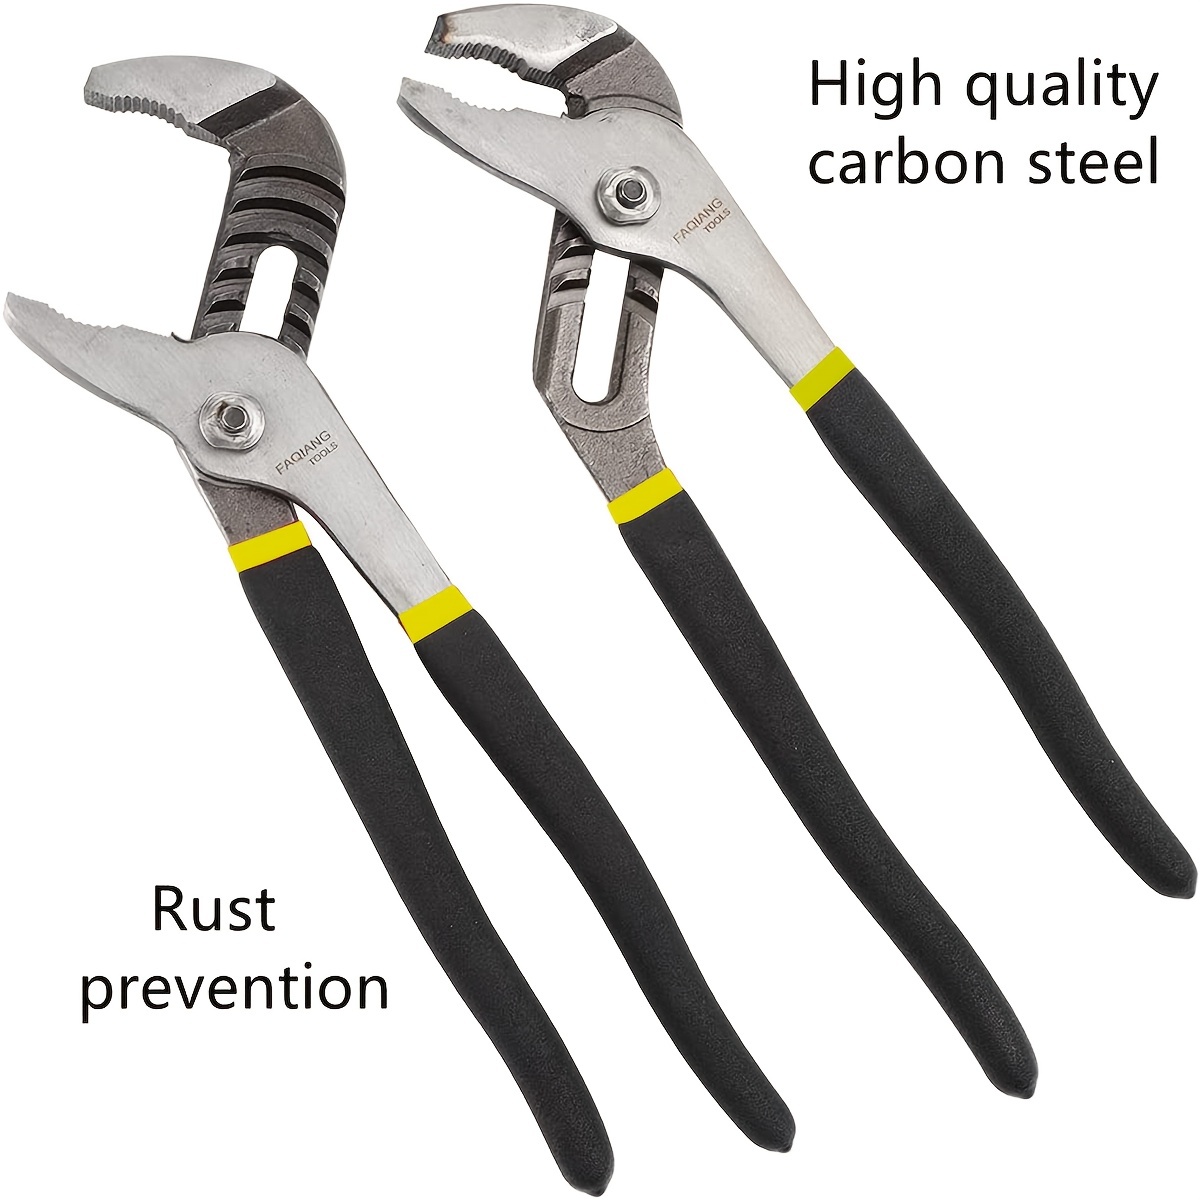 

Generies Brands Straight Jaw Tongue And Groove Pliers, Water Pump Pliers Groove Joint Pliers, Carbon Steel, High-visibility Handle (10 Inch)